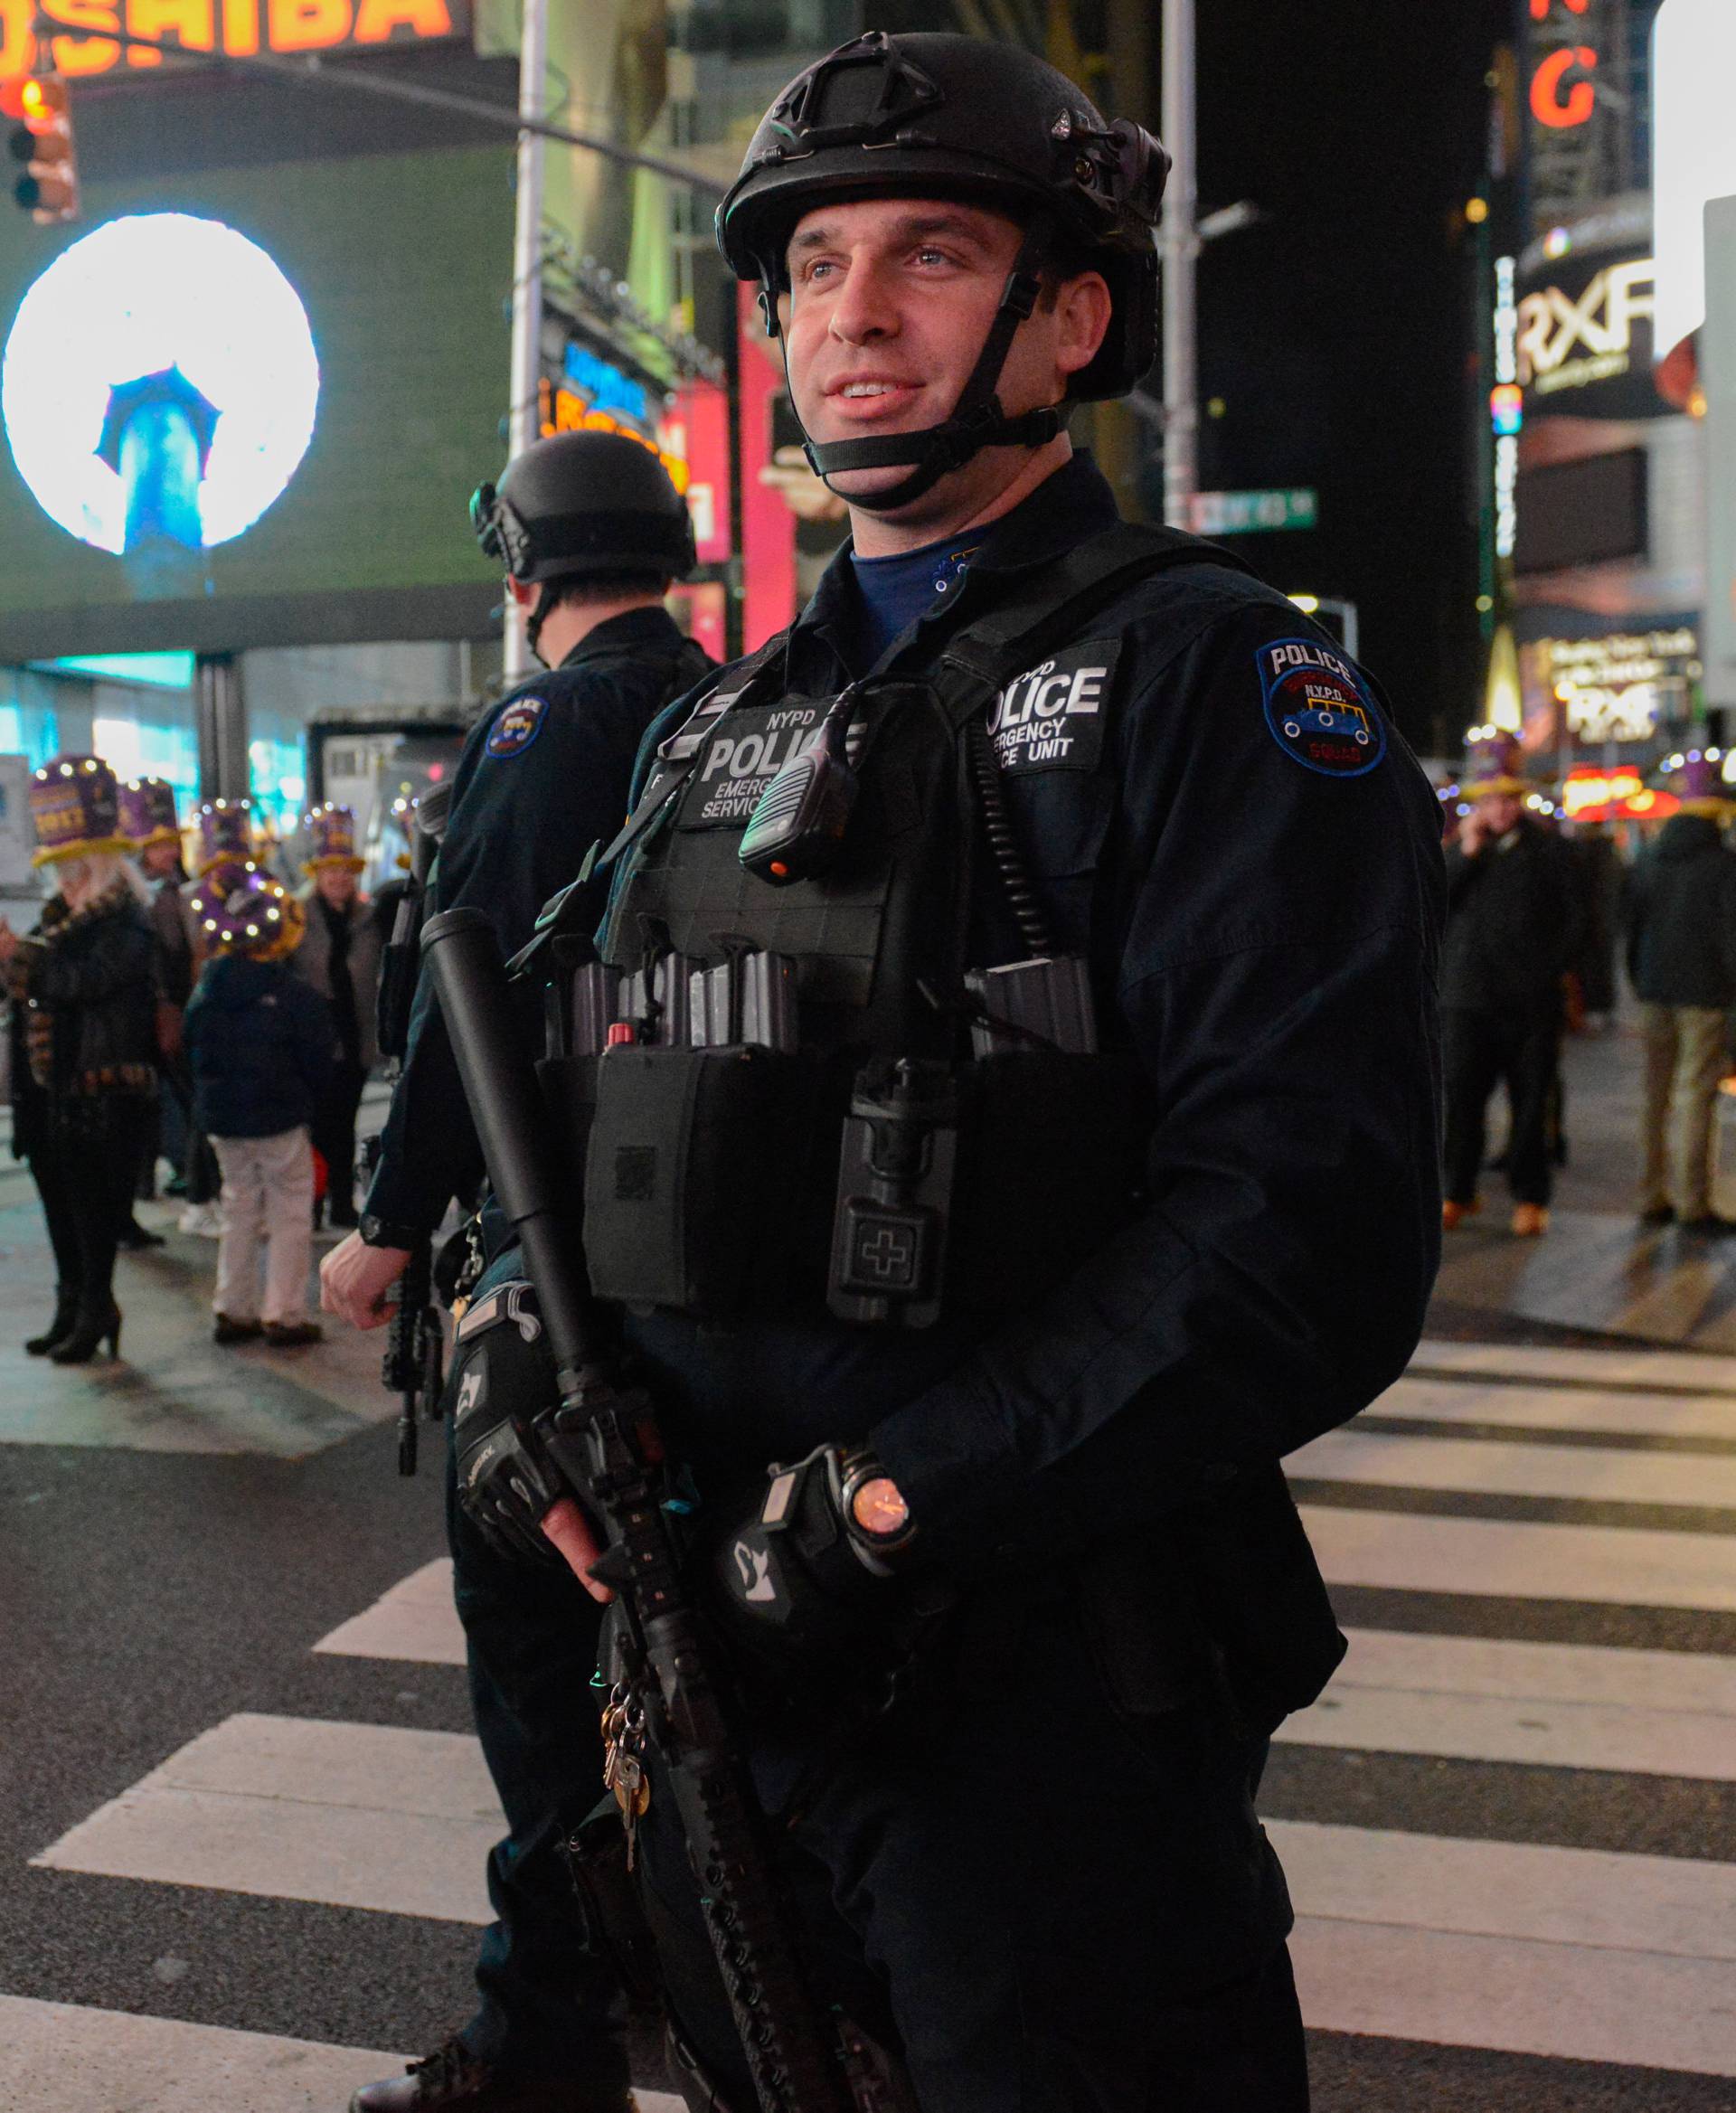 Members of the counter terrorism task force stand guard in Times Square on New Year's Eve in New York